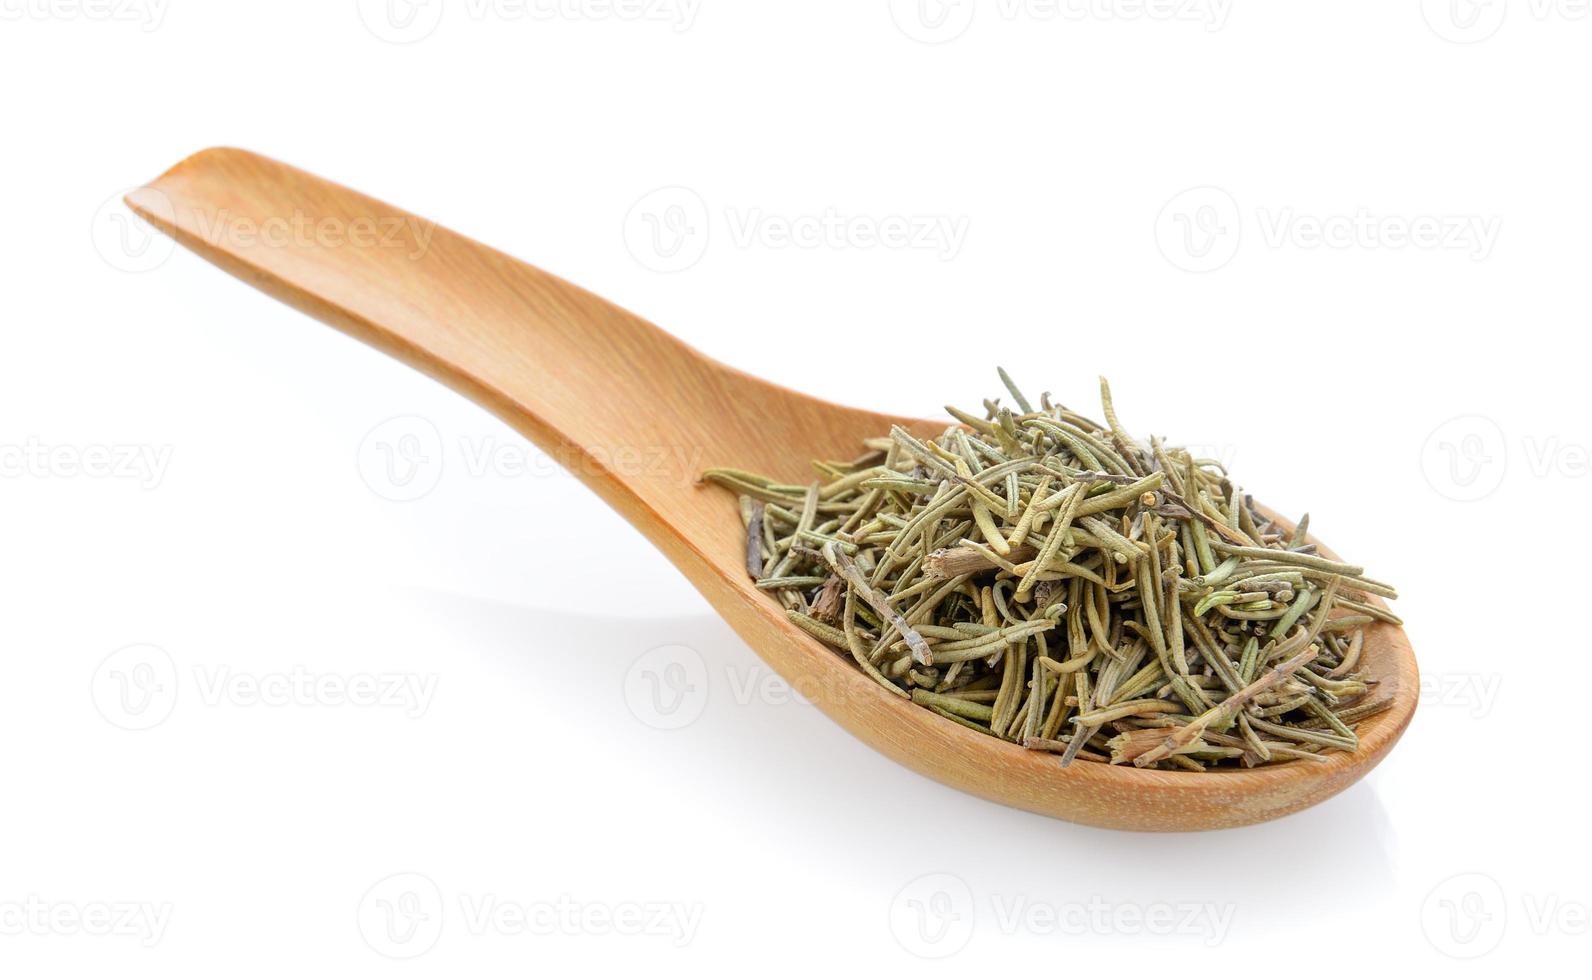 Dried rosemary leaves in wooden spoon over white background photo